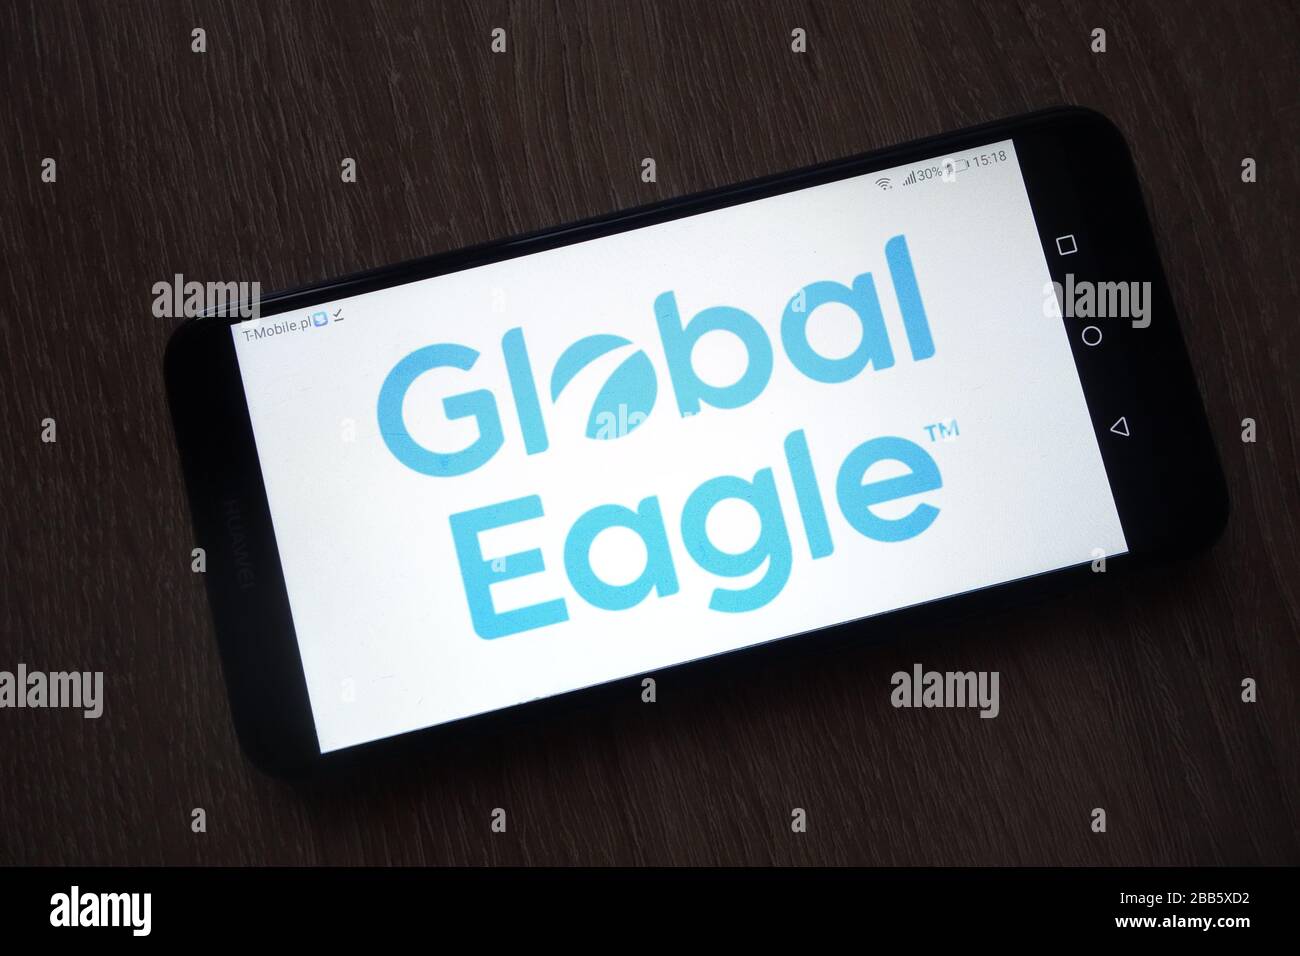 Global Eagle Entertainment (GEE) logo displayed on smartphone Stock Photo